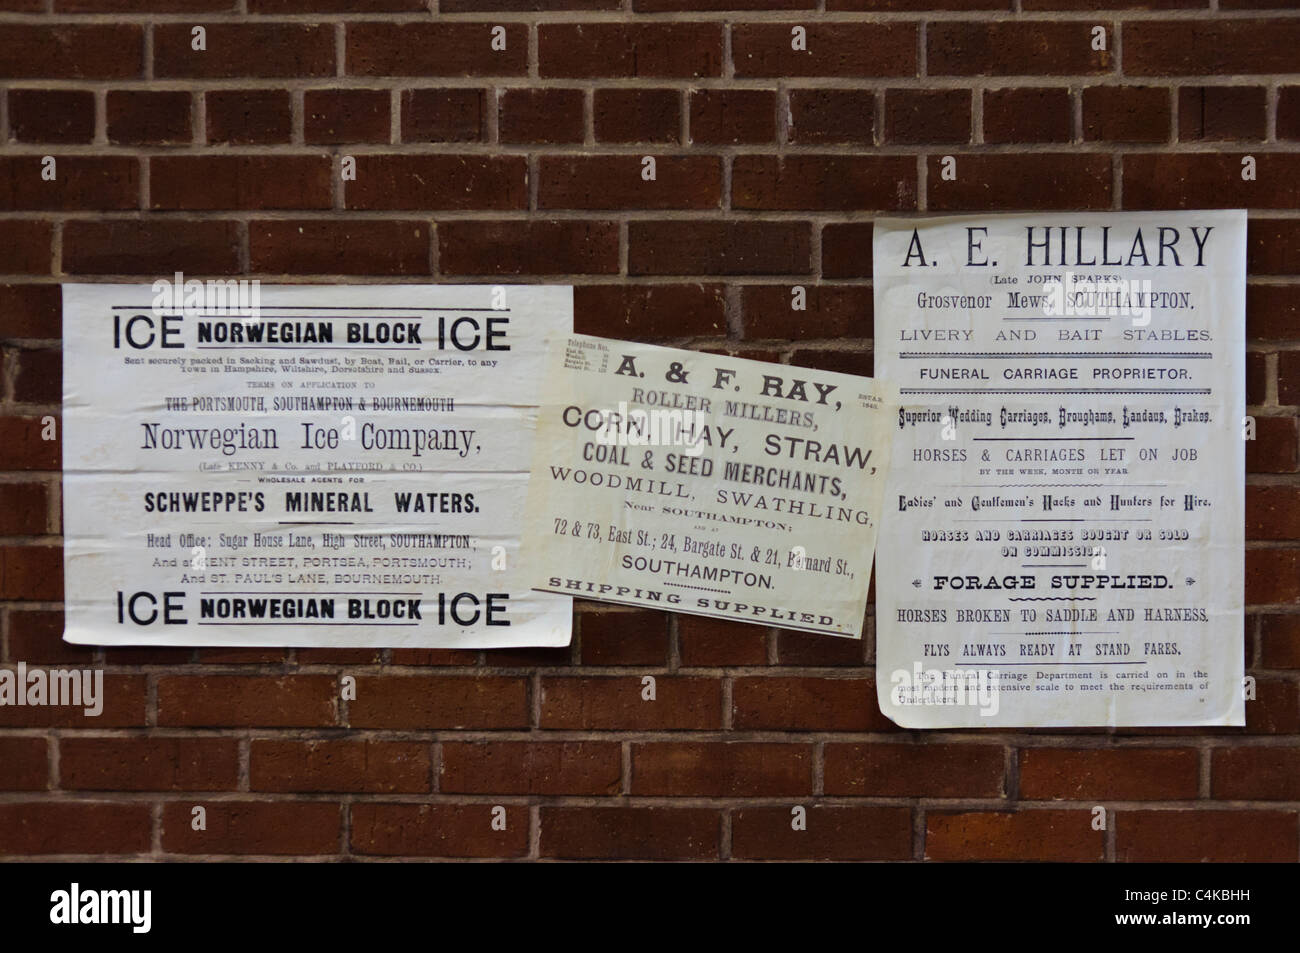 Old fashioned fly posters on a brick wall: Norwegian Ice Company, Corn and Hay millers, Funeral providers. Stock Photo